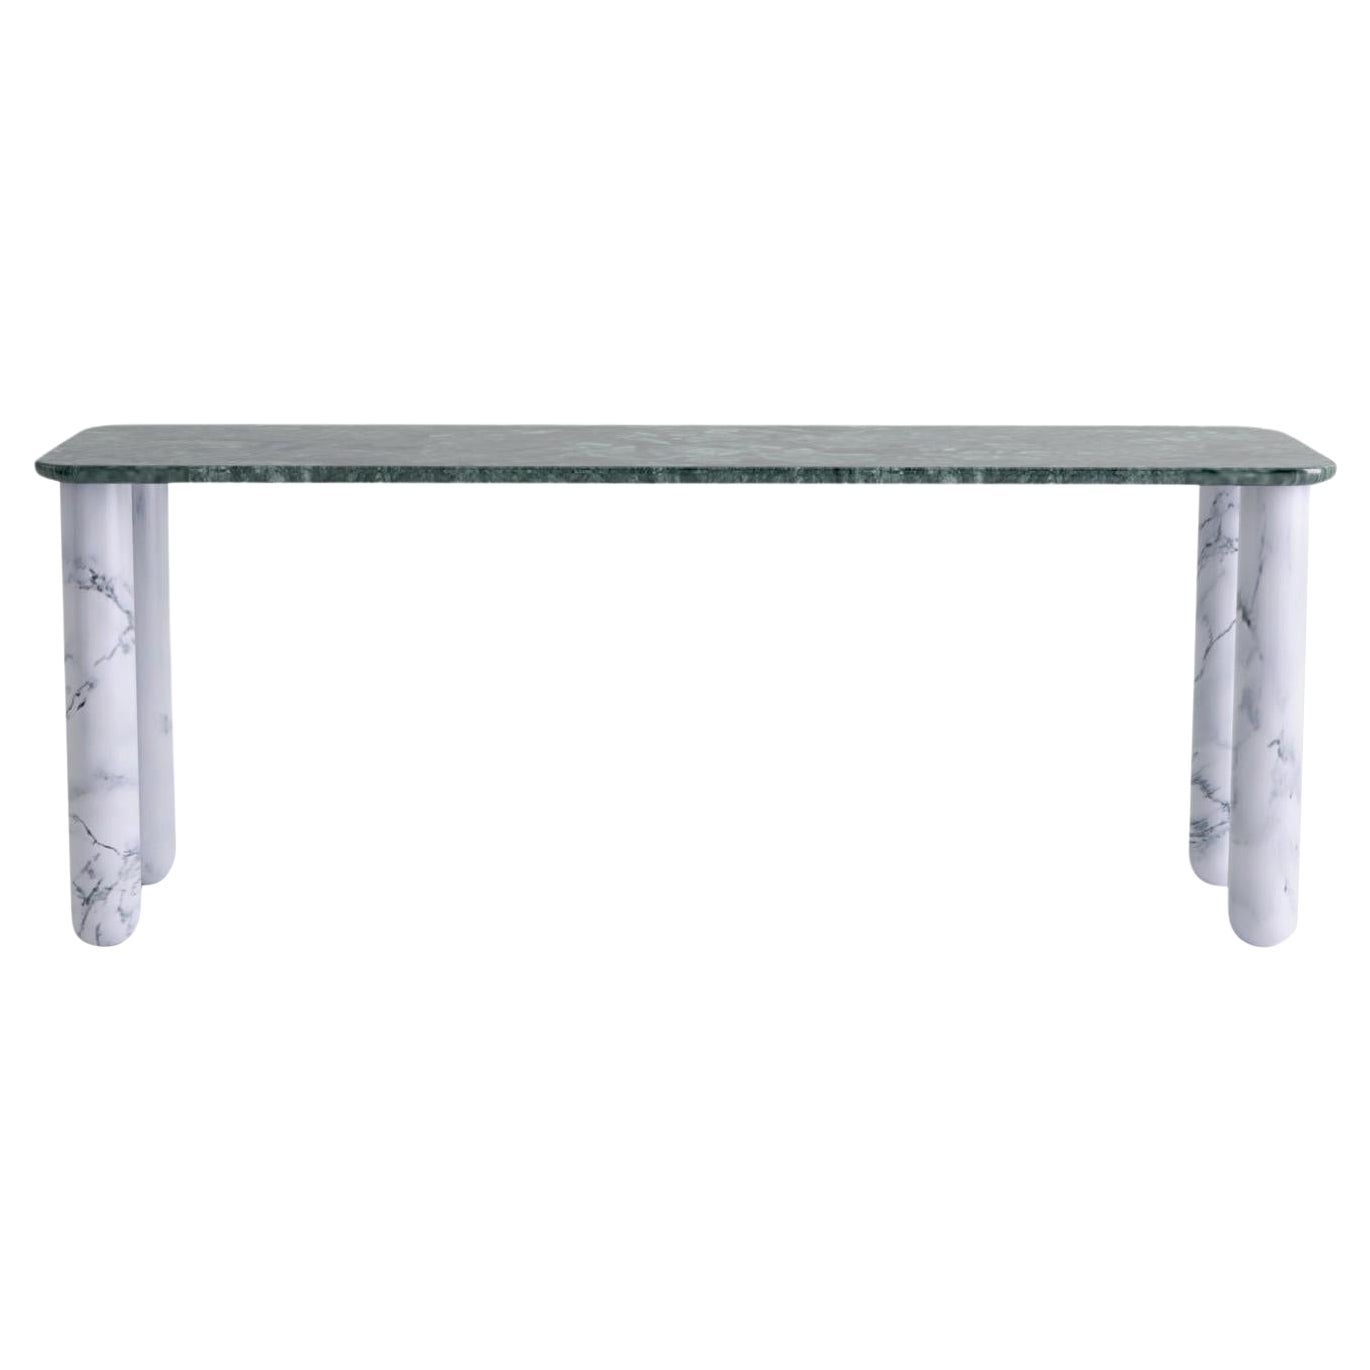 Large Green and White Marble "Sunday" Dining Table, Jean-Baptiste Souletie For Sale